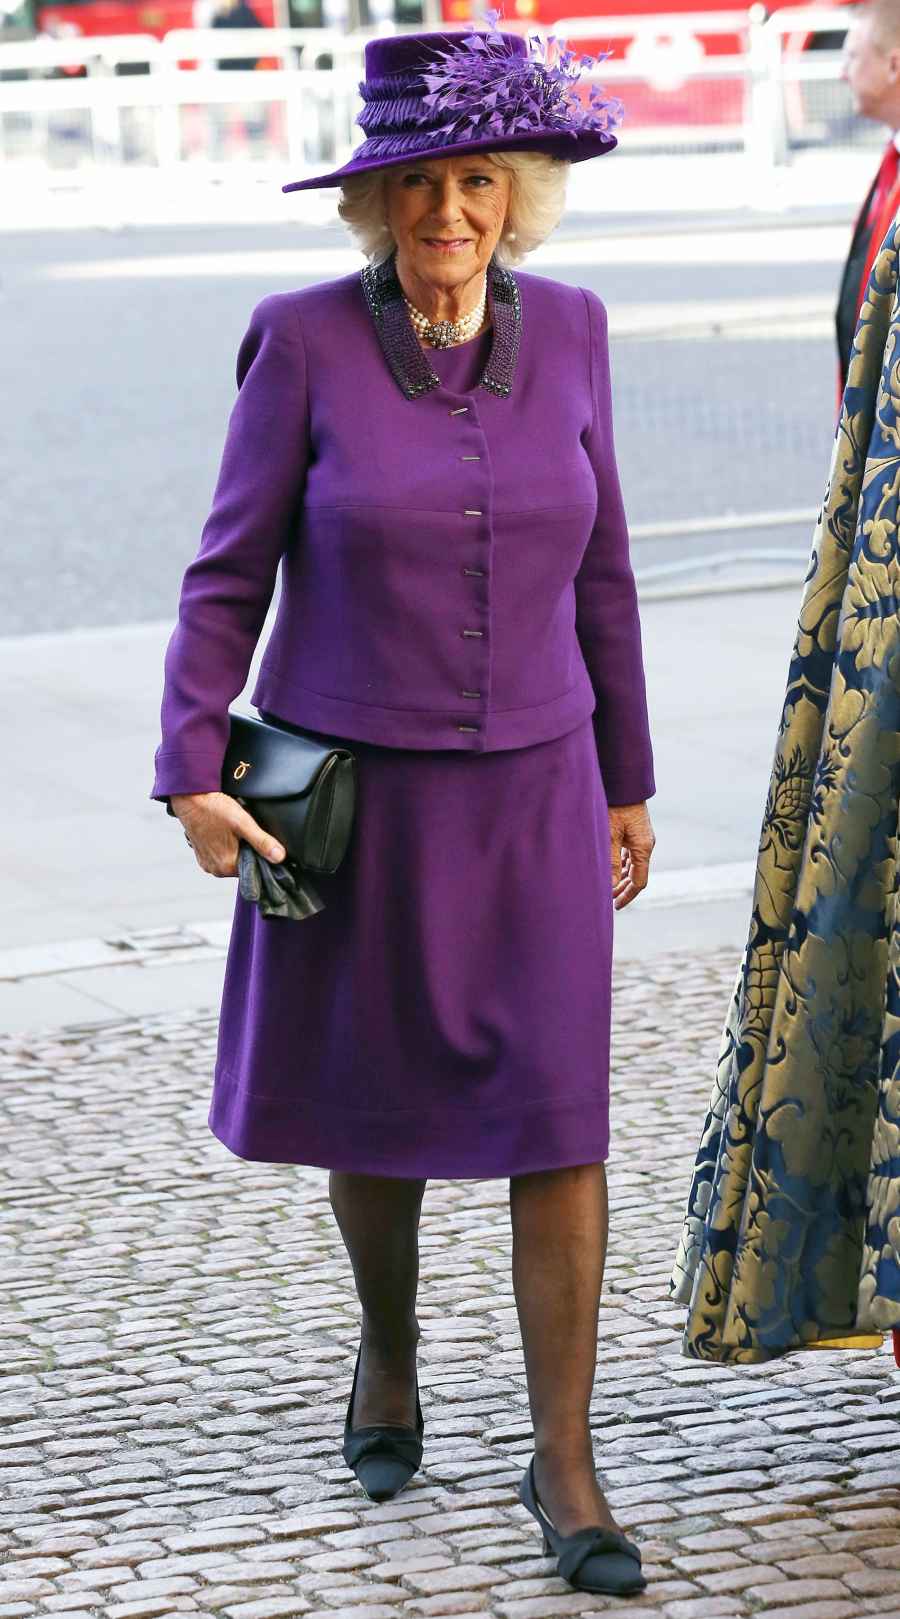 Camilla Duchess of Cornwall's Style - March 13, 2017